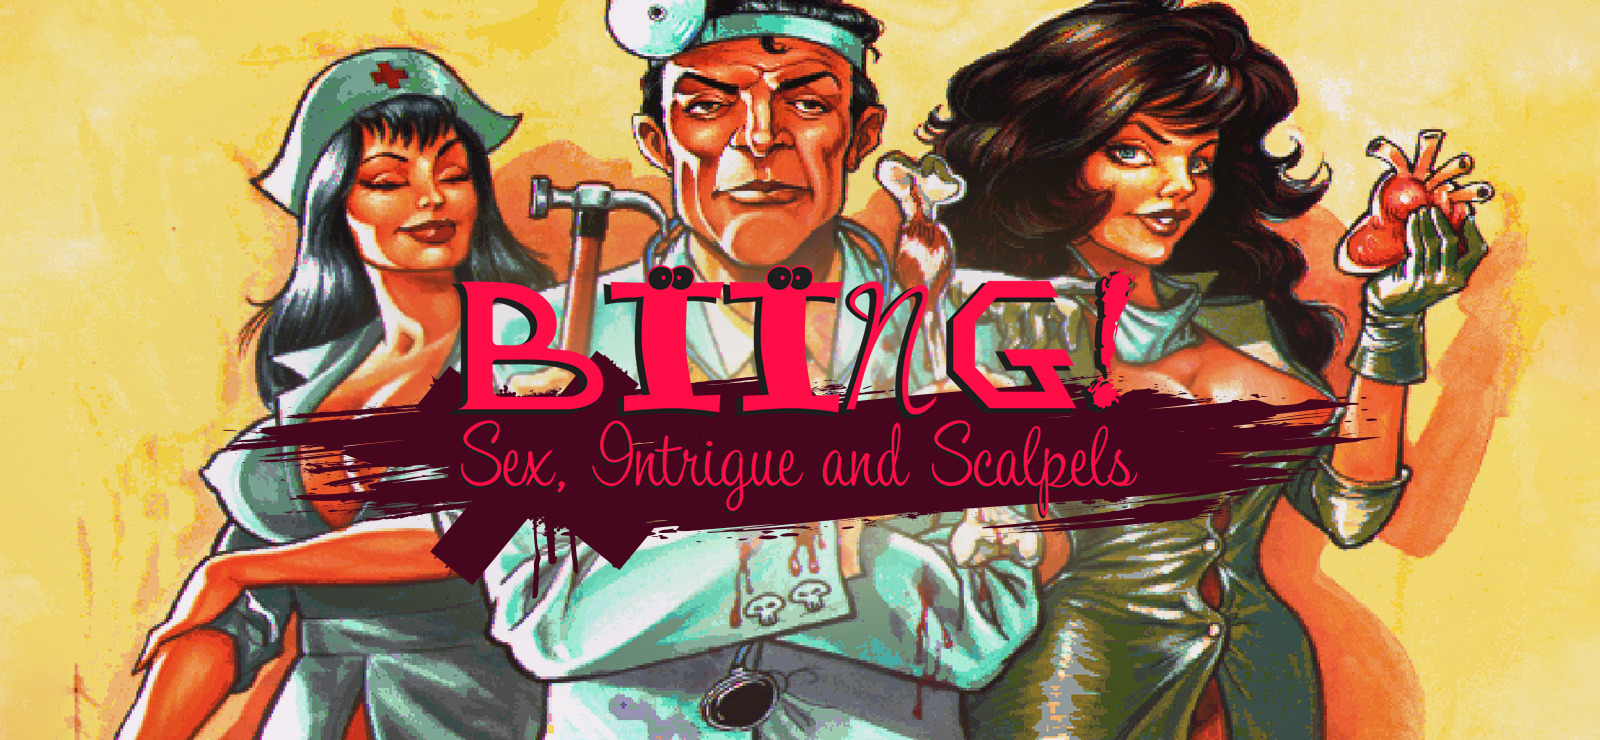 

Mature content notice: Biing!: Sex, Intrigue and Scalpels contains explicit language, s